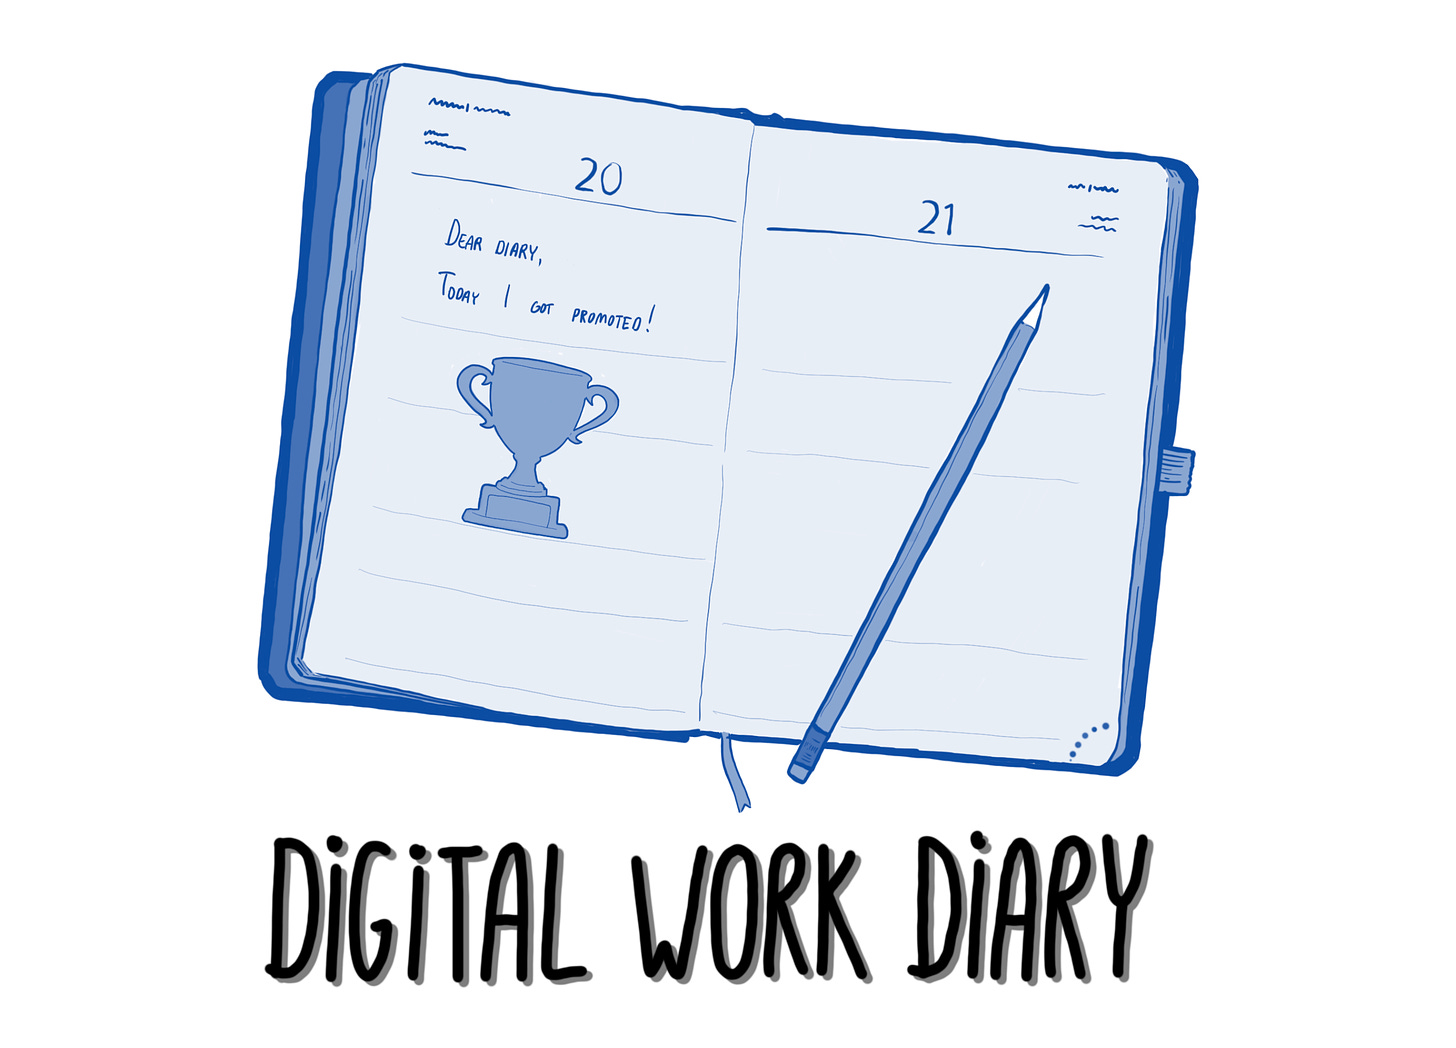 Diary open with a note about promotion at work